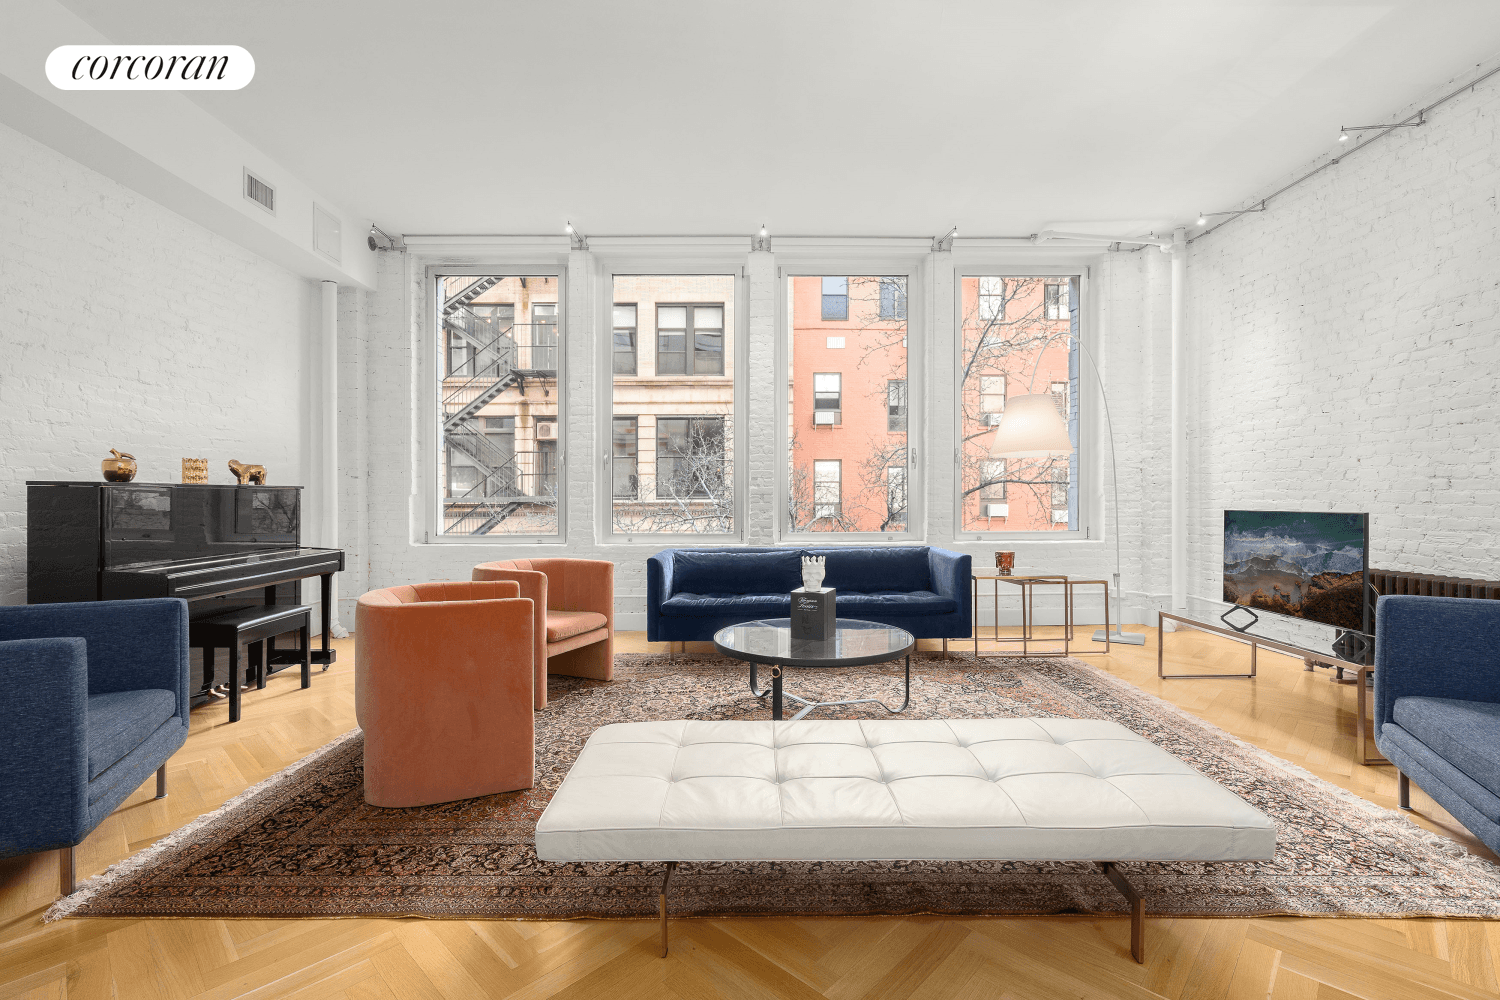 55 East 11th Street 3rd FloorImmaculate renovation of a classic village loft awaits you in this wonderful boutique Greenwich Village Loft Co Operative.